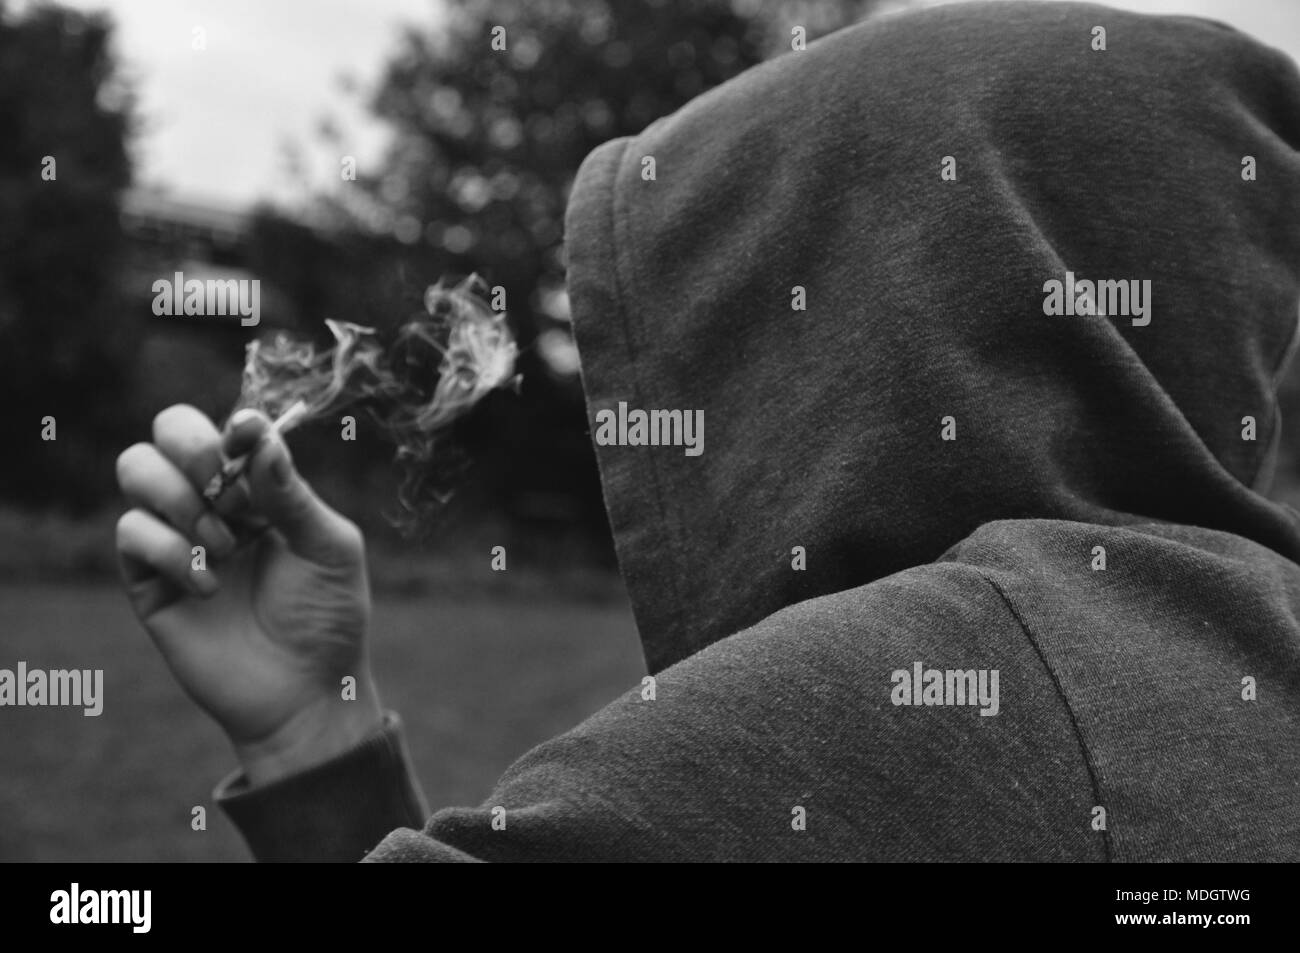 Mysterious faceless person smoking wearing a hood Stock Photo